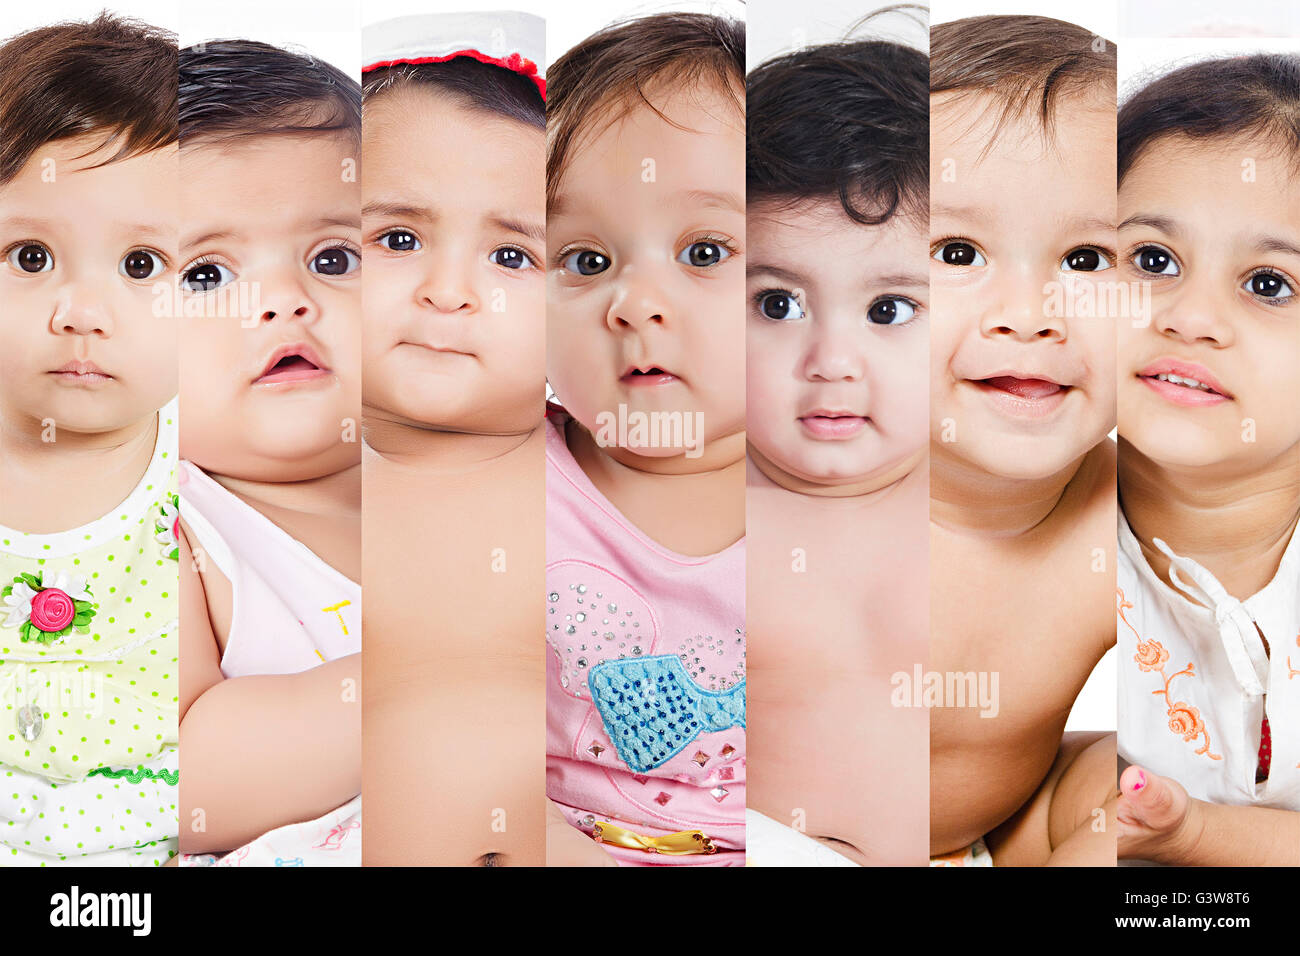 Babies Boys Digitally Enhanced Diversity Girls Groups or Crowds Kids Montage Photography Picture Stock Photo